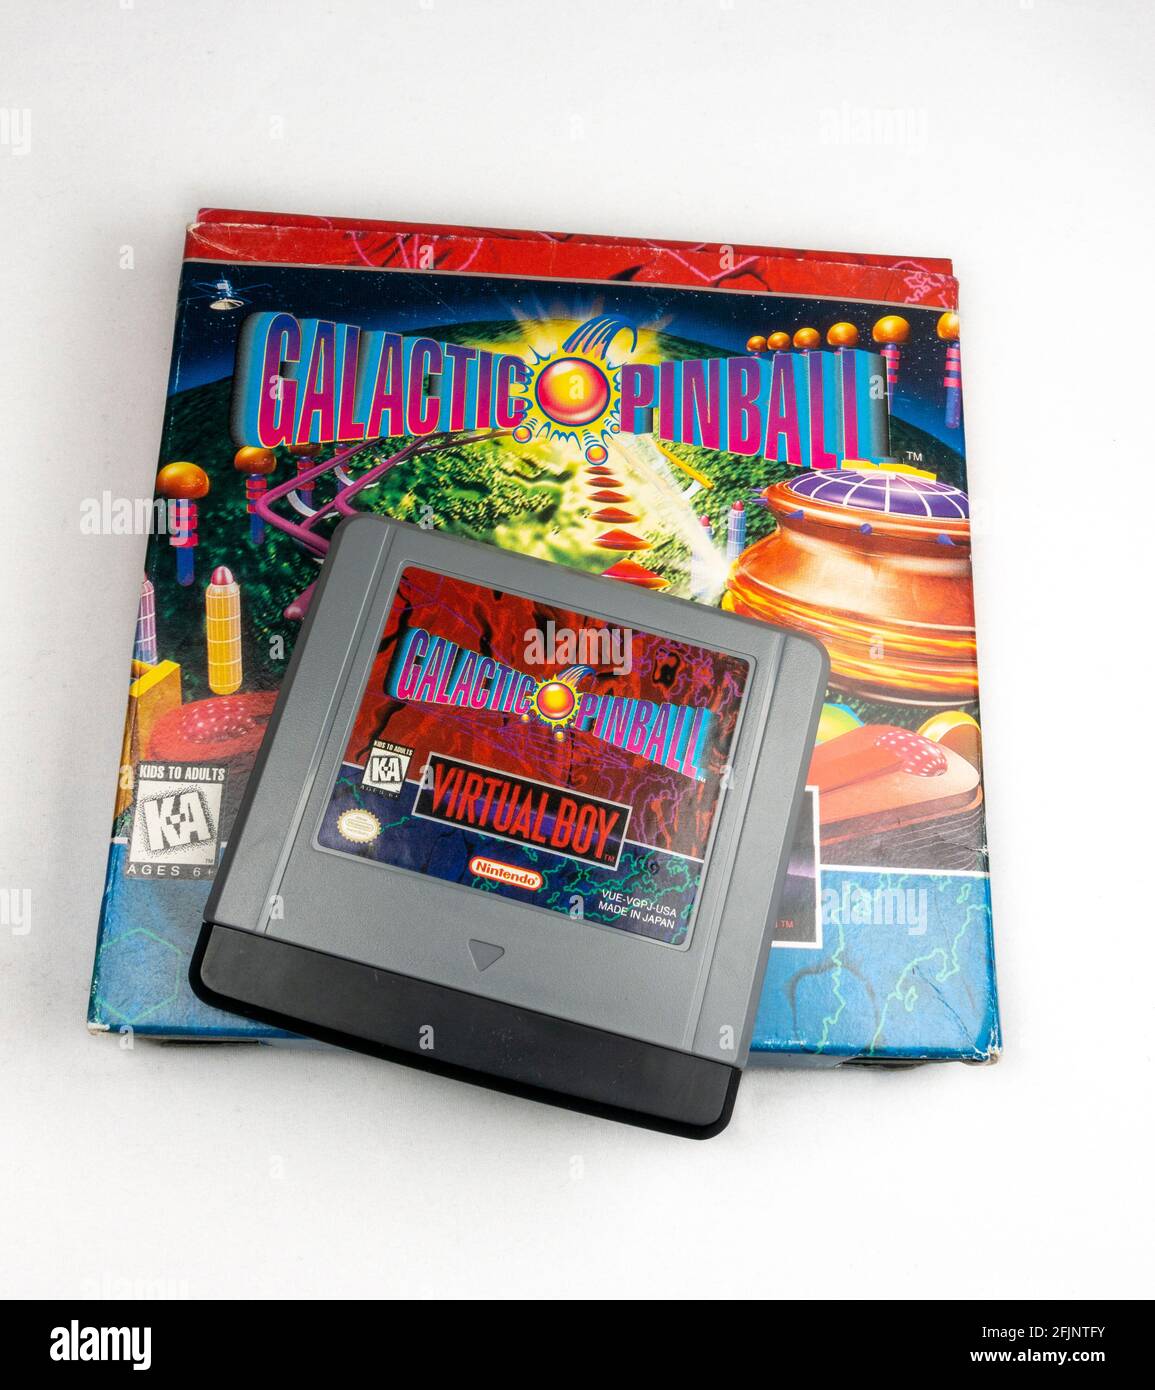 A Galactic Pinball game cartridge for the Nintendo Virtual Boy table-top video game console, launched in Japan in 1995, (it did not launch in Europe). Stock Photo